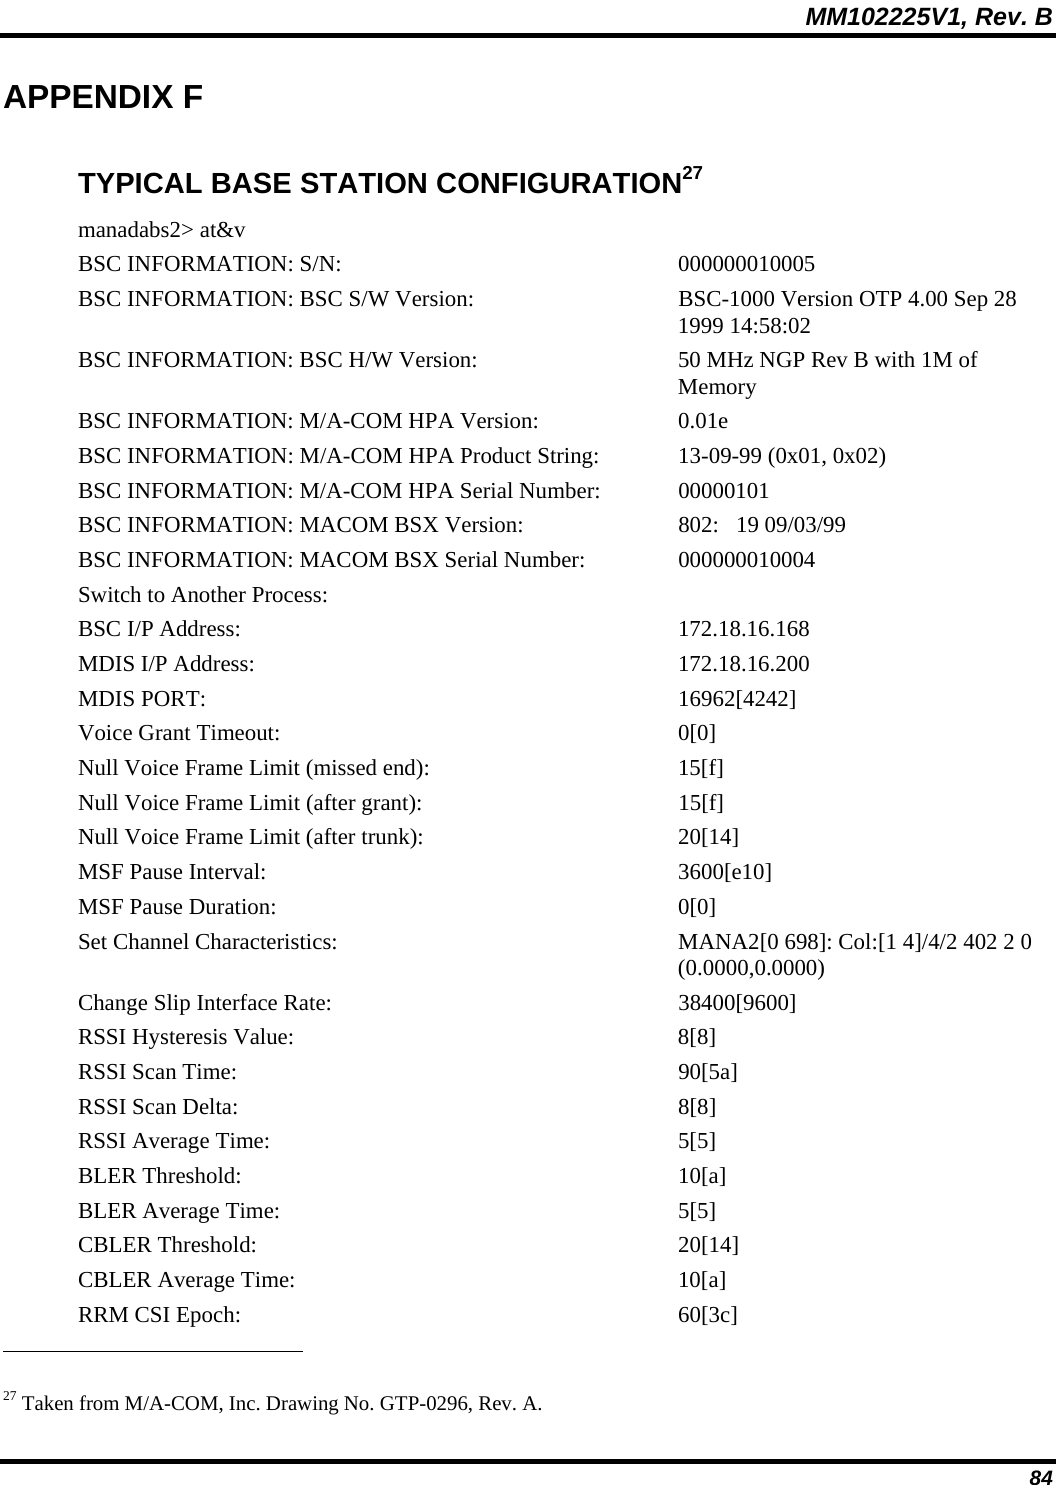 MM102225V1, Rev. B  84 APPENDIX F TYPICAL BASE STATION CONFIGURATION27 manadabs2&gt; at&amp;v BSC INFORMATION: S/N:   000000010005 BSC INFORMATION: BSC S/W Version:   BSC-1000 Version OTP 4.00 Sep 28 1999 14:58:02 BSC INFORMATION: BSC H/W Version:   50 MHz NGP Rev B with 1M of Memory BSC INFORMATION: M/A-COM HPA Version:    0.01e BSC INFORMATION: M/A-COM HPA Product String:   13-09-99 (0x01, 0x02) BSC INFORMATION: M/A-COM HPA Serial Number:    00000101 BSC INFORMATION: MACOM BSX Version:   802:   19 09/03/99 BSC INFORMATION: MACOM BSX Serial Number:  000000010004 Switch to Another Process:  BSC I/P Address:   172.18.16.168 MDIS I/P Address:   172.18.16.200 MDIS PORT:   16962[4242]  Voice Grant Timeout:   0[0]  Null Voice Frame Limit (missed end):   15[f]  Null Voice Frame Limit (after grant):   15[f]  Null Voice Frame Limit (after trunk):   20[14]  MSF Pause Interval:   3600[e10]  MSF Pause Duration:   0[0]  Set Channel Characteristics:  MANA2[0 698]: Col:[1 4]/4/2 402 2 0 (0.0000,0.0000) Change Slip Interface Rate:   38400[9600]  RSSI Hysteresis Value:   8[8]  RSSI Scan Time:   90[5a]  RSSI Scan Delta:   8[8]  RSSI Average Time:   5[5]  BLER Threshold:   10[a]  BLER Average Time:   5[5]  CBLER Threshold:   20[14]  CBLER Average Time:   10[a]  RRM CSI Epoch:   60[3c]                                                             27 Taken from M/A-COM, Inc. Drawing No. GTP-0296, Rev. A. 